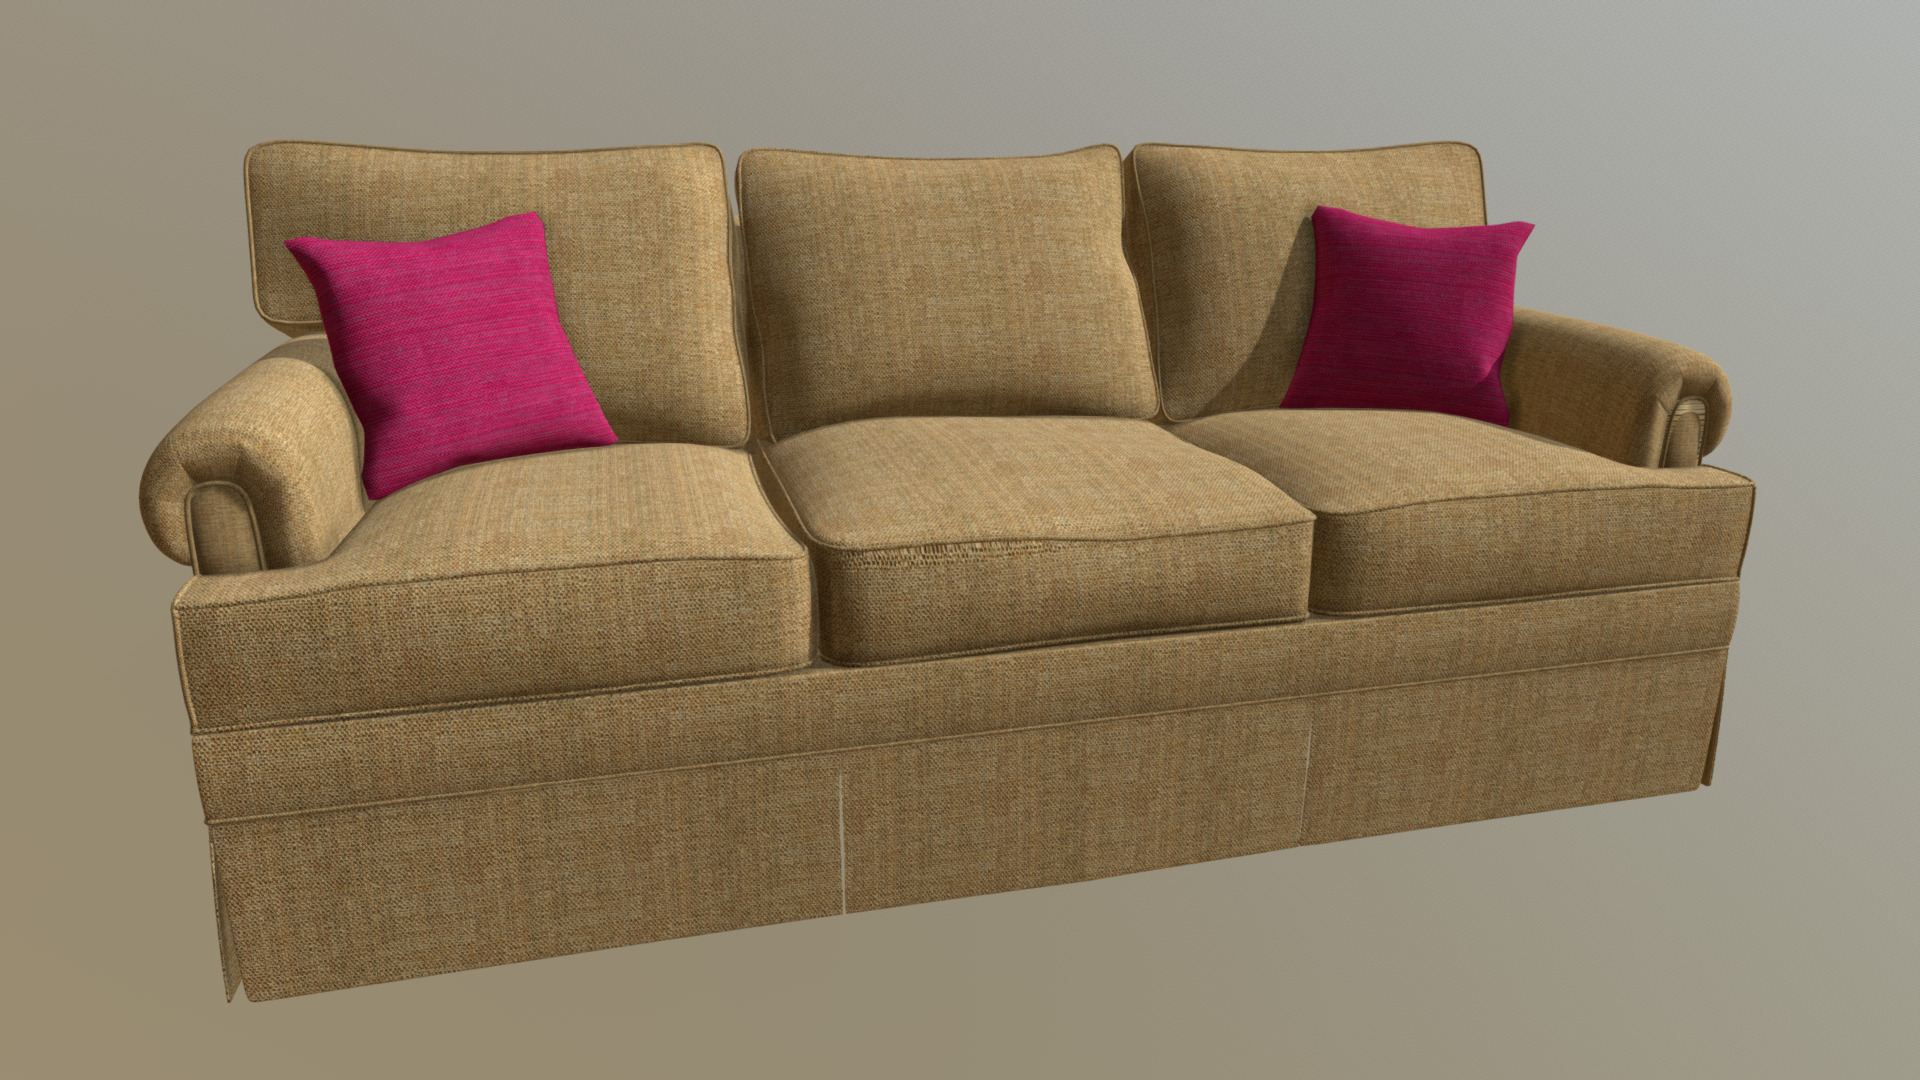 3D model Paramount Sofa - This is a 3D model of the Paramount Sofa. The 3D model is about a couch with pillows.